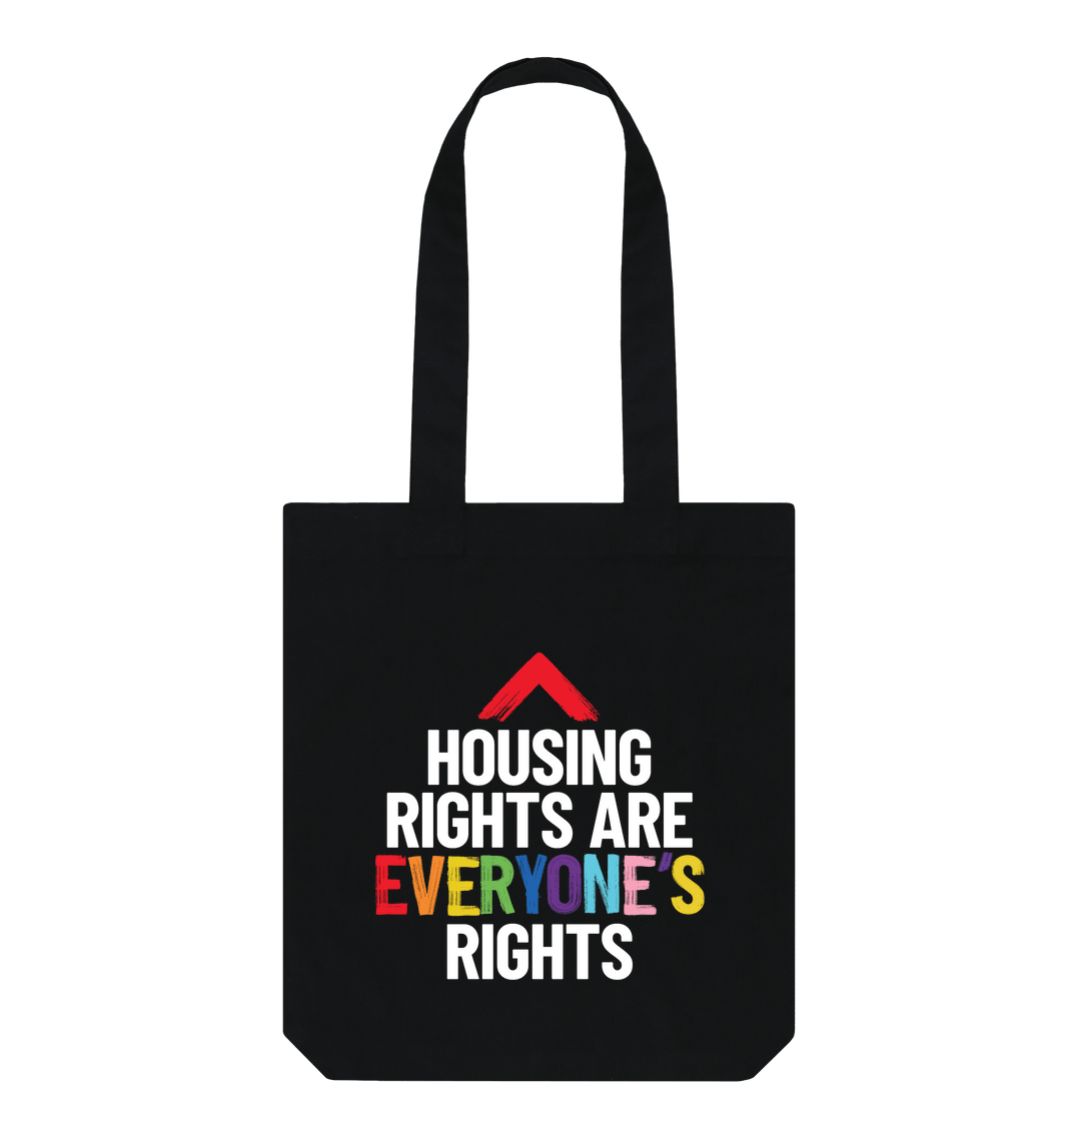 black tote bag with slogan "Housing rights are everyone's rights" The word everyone's is in the LGBTQ+ flag colours